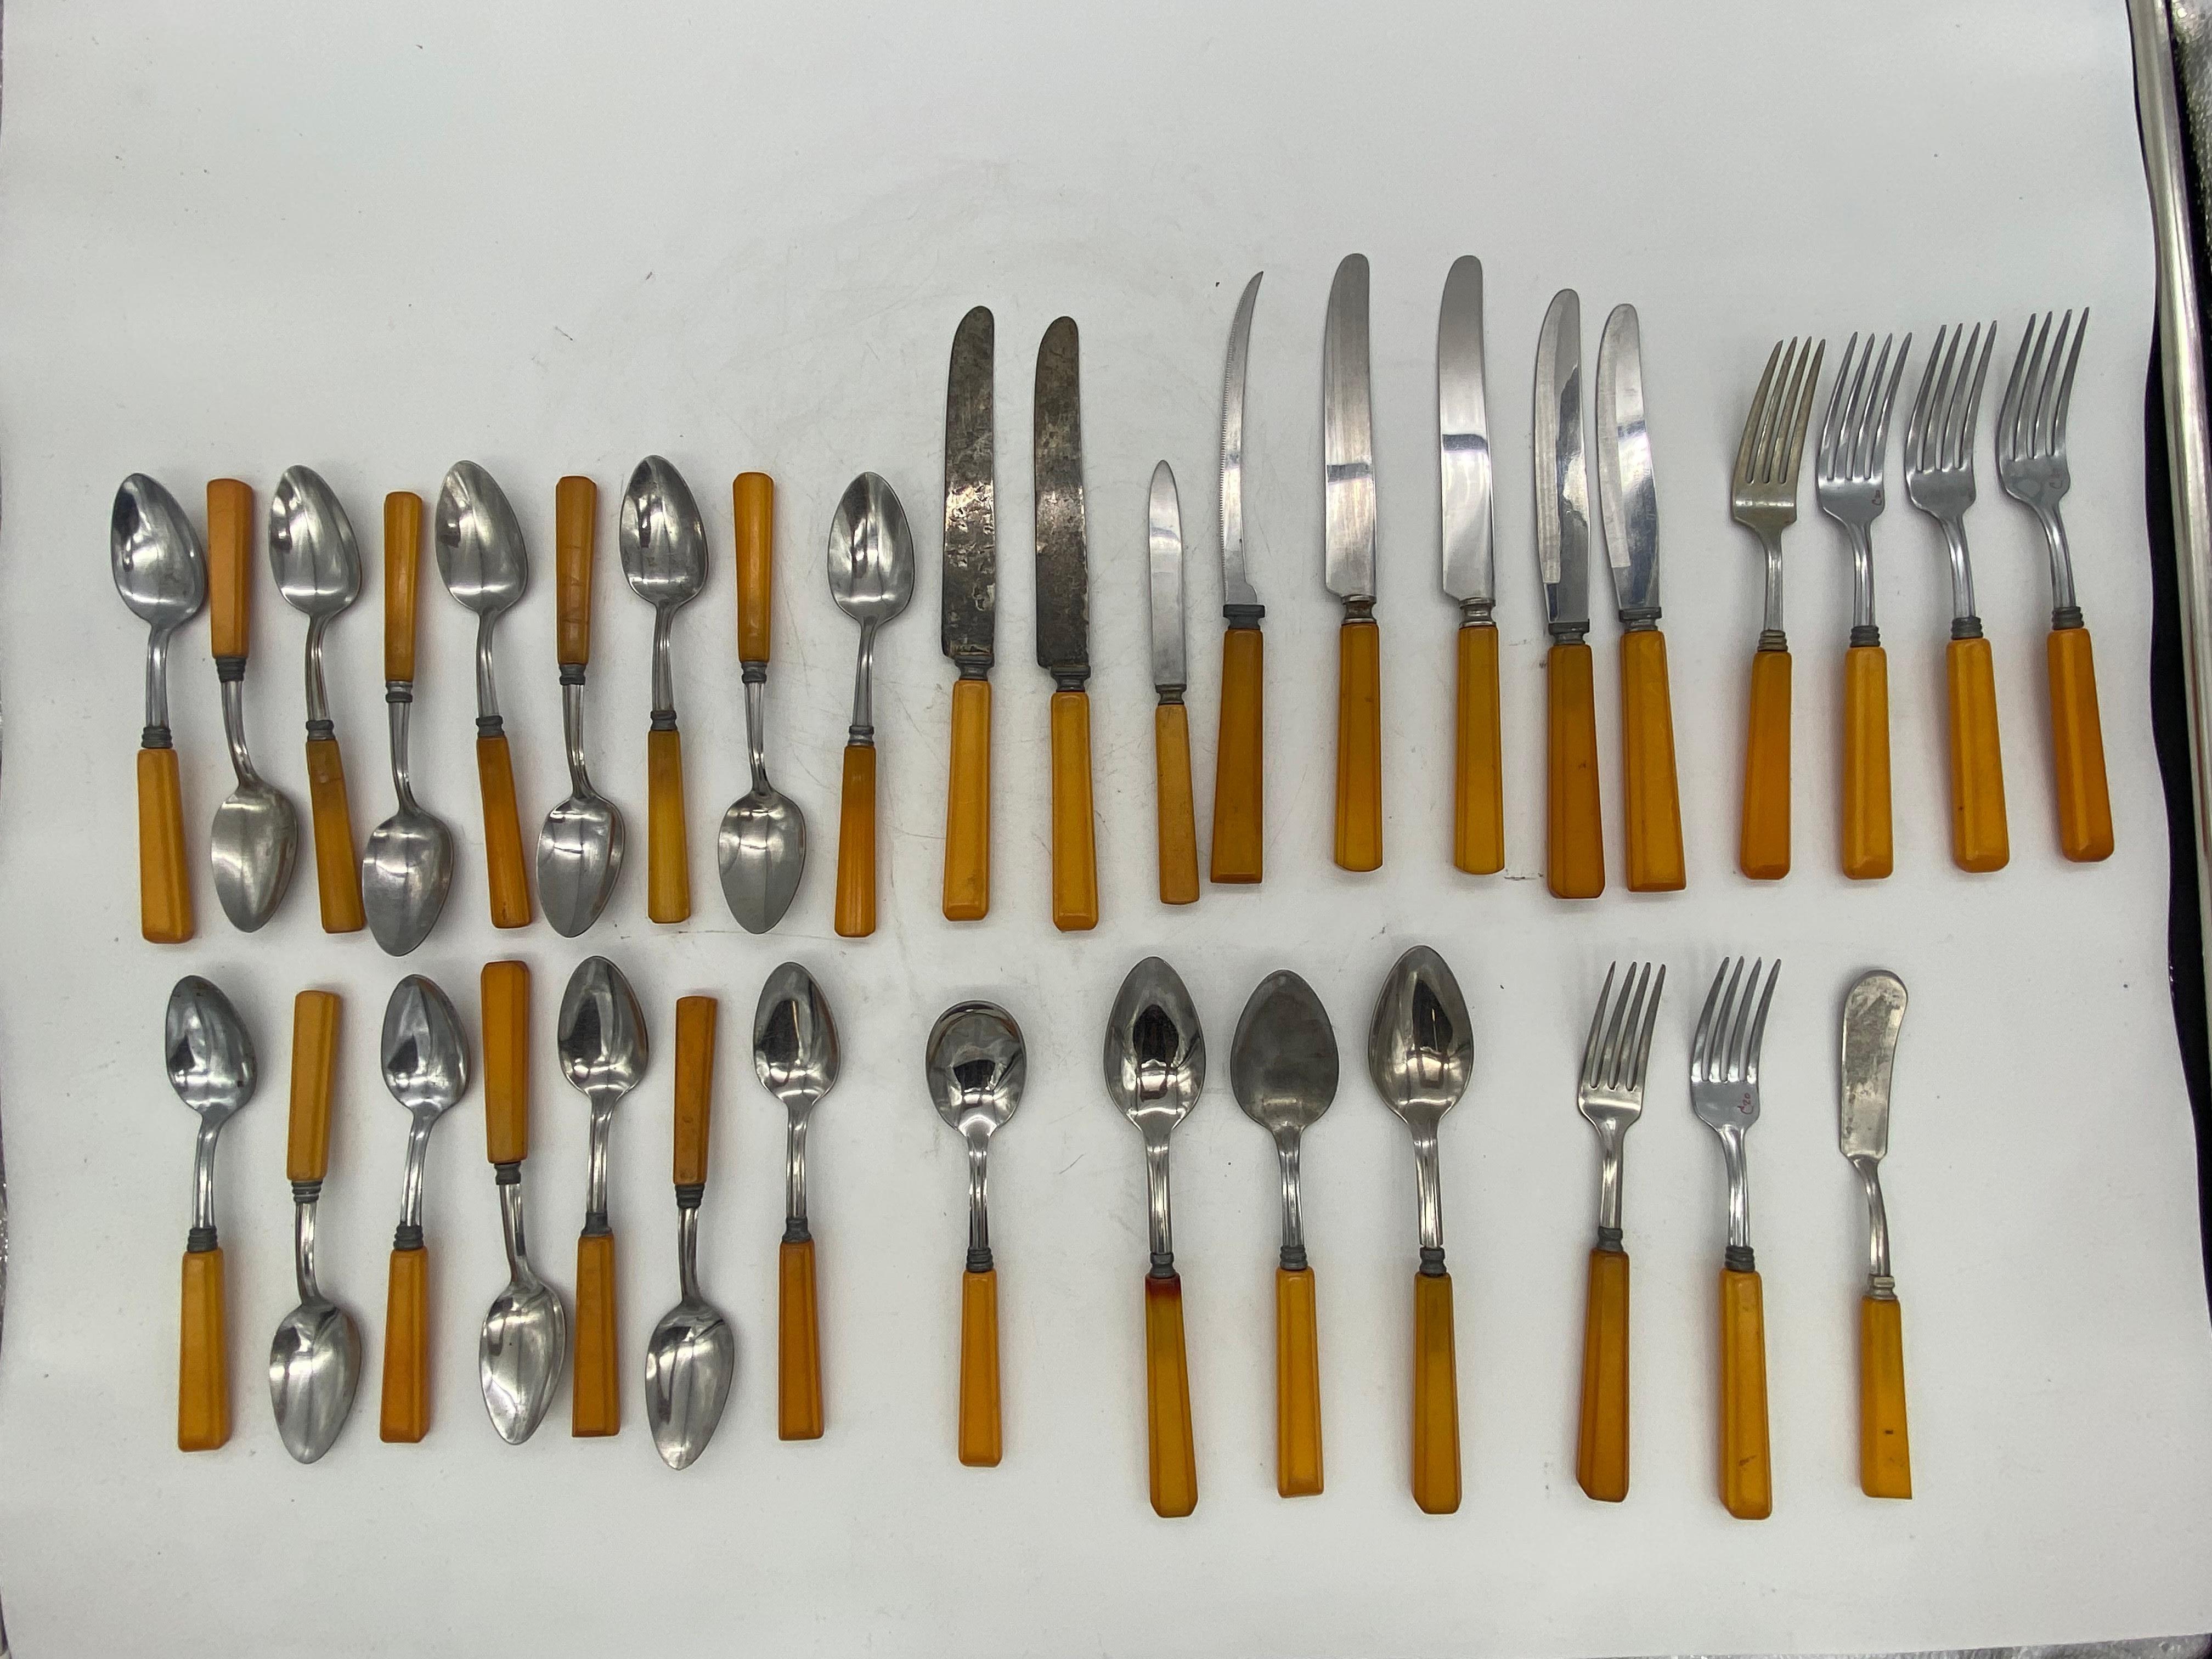 This is a set of 35 vintage Bakelite mix matvhes set with a rare filet knife and a rare cheese and spread knive. This is a wonderful starter kit with everything you need to get started, this set has a beautiful art deco design with lined down to the